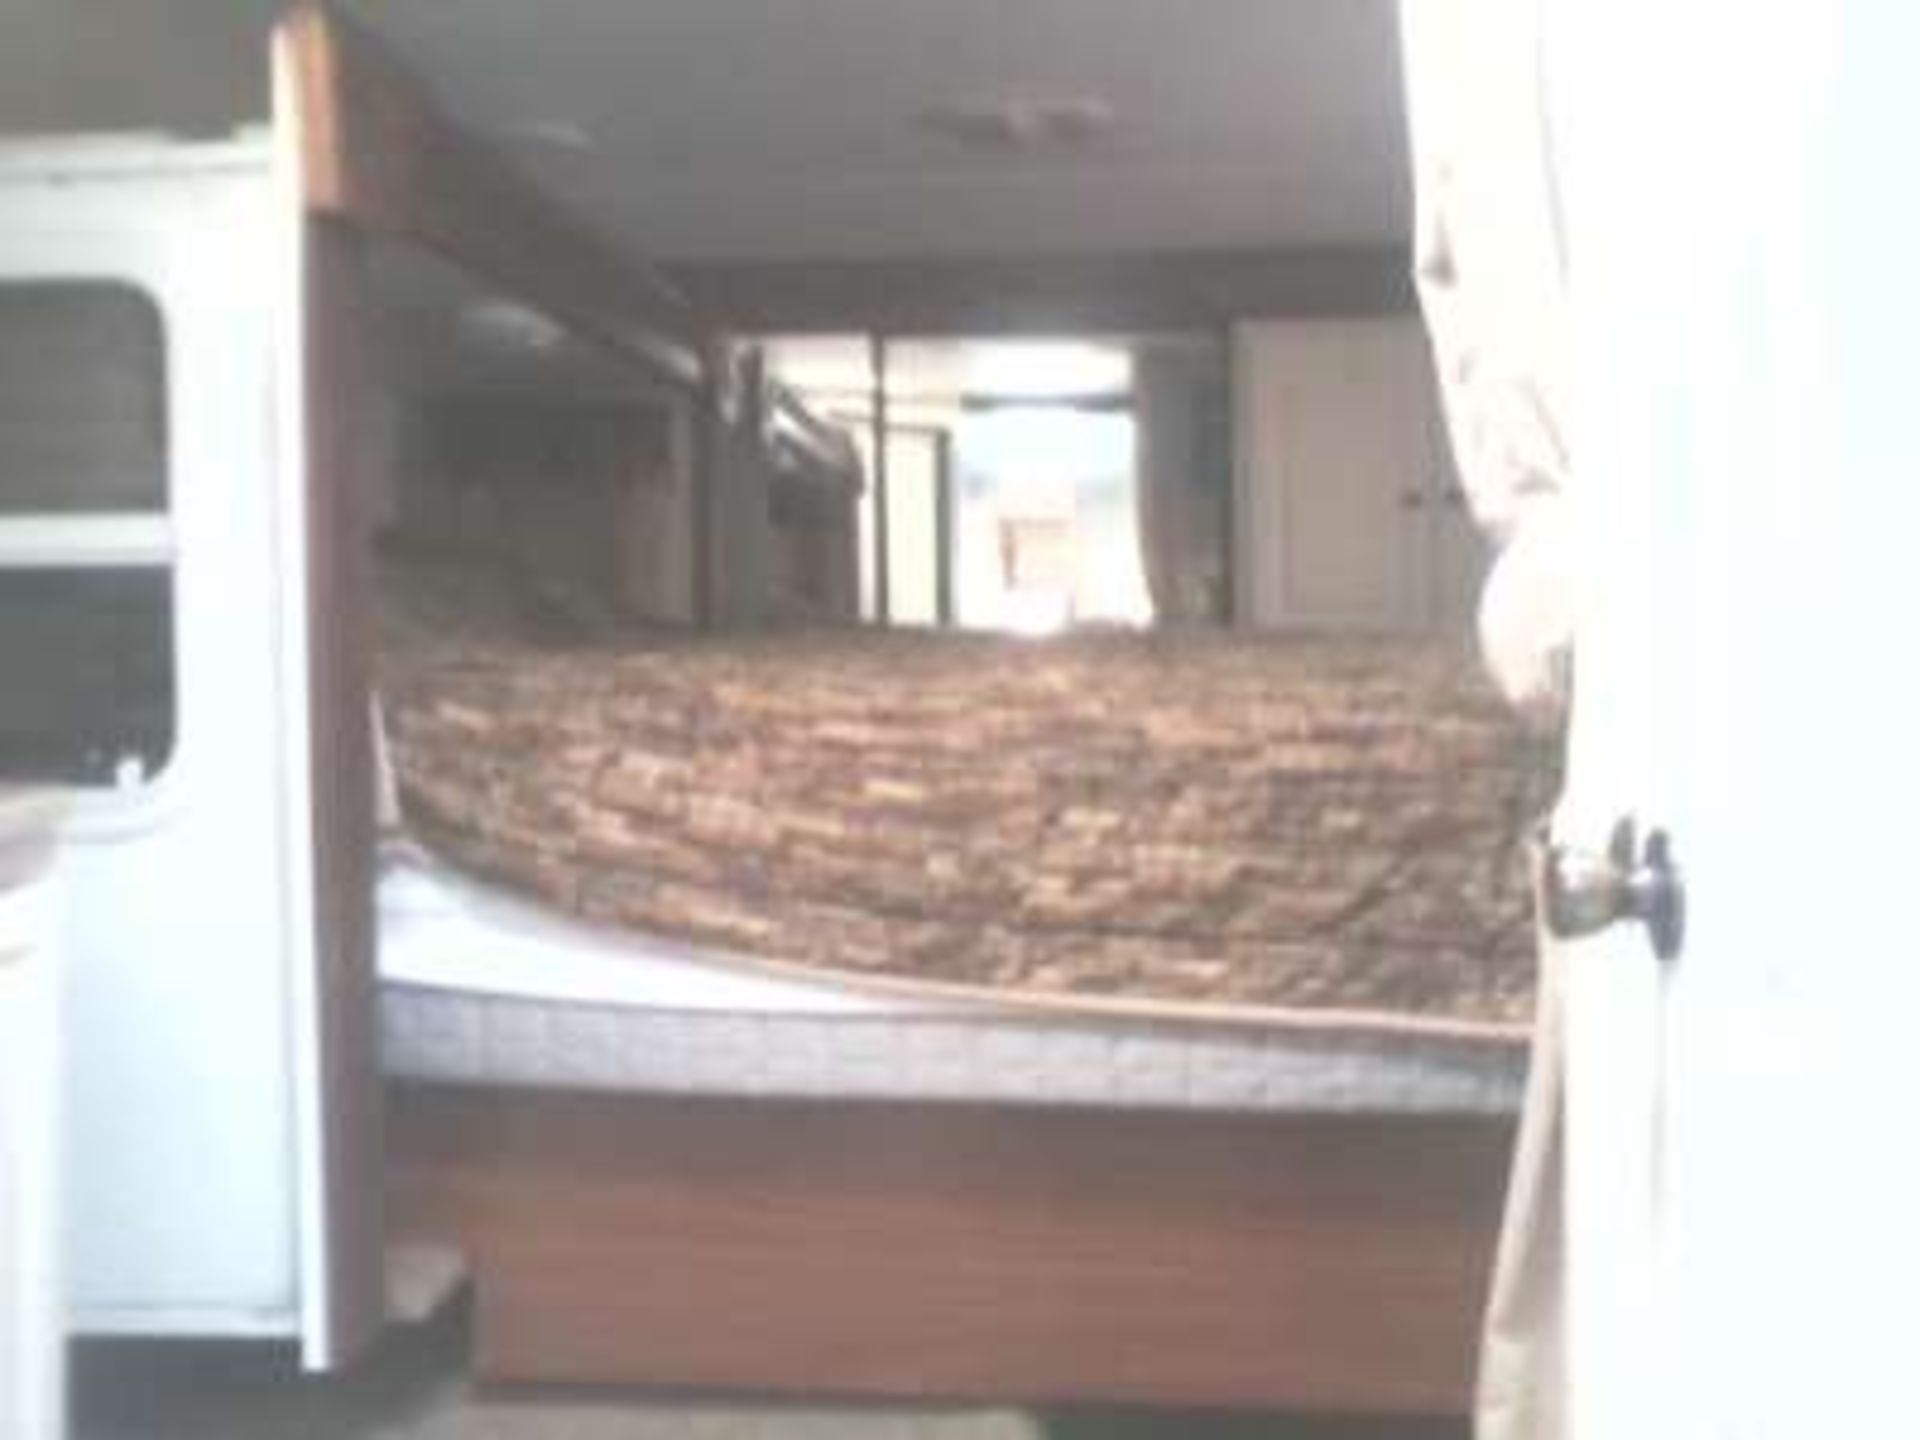 2009 30ft Outback 5TH Wheel Holiday Trailer, 2 slides, kitchen, dining table w/4 chairs, couch, 2 - Image 3 of 9